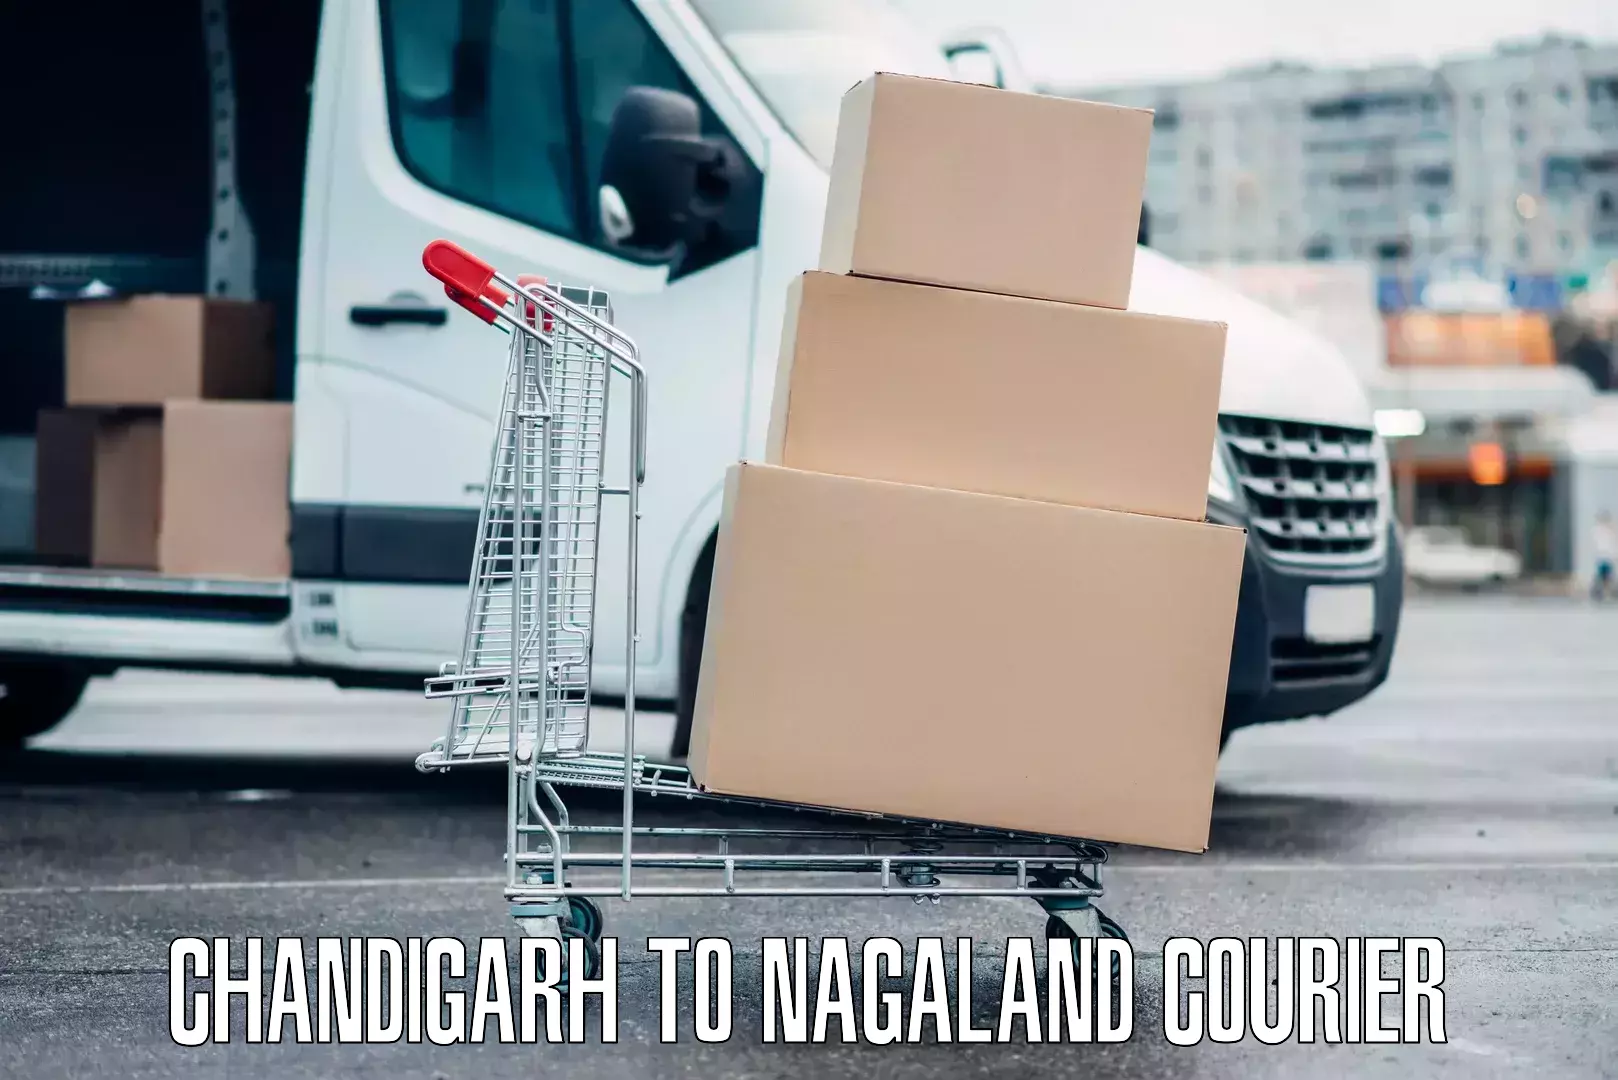 Luggage transport consultancy Chandigarh to Nagaland